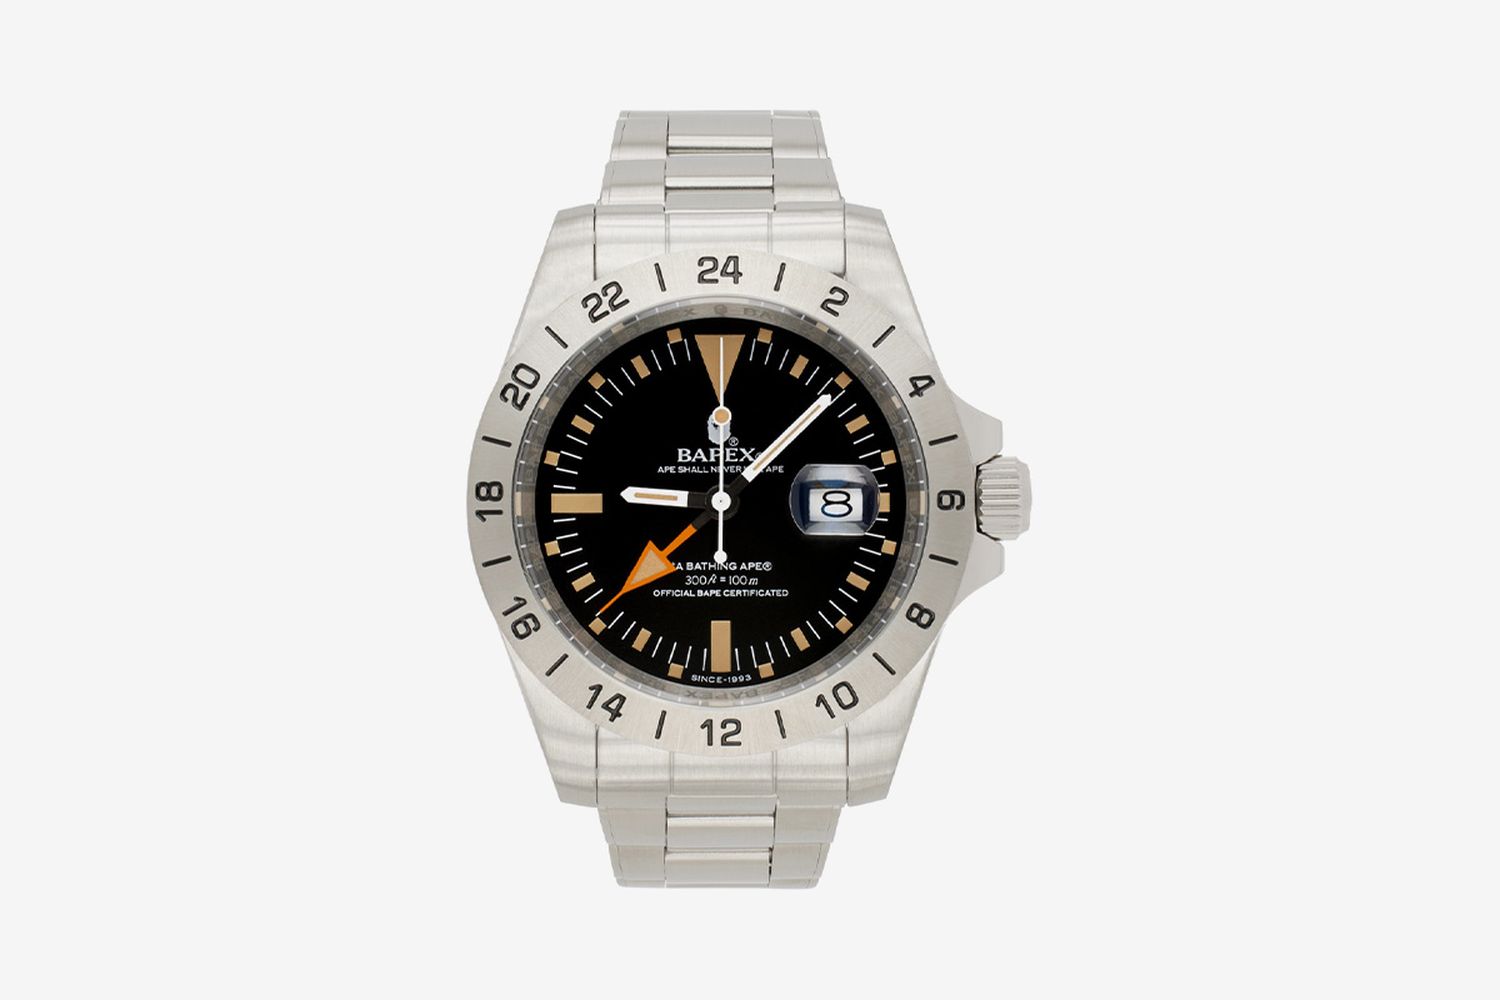 Shop the Best New A Bathing APE BAPEX Watches for 2023 Here